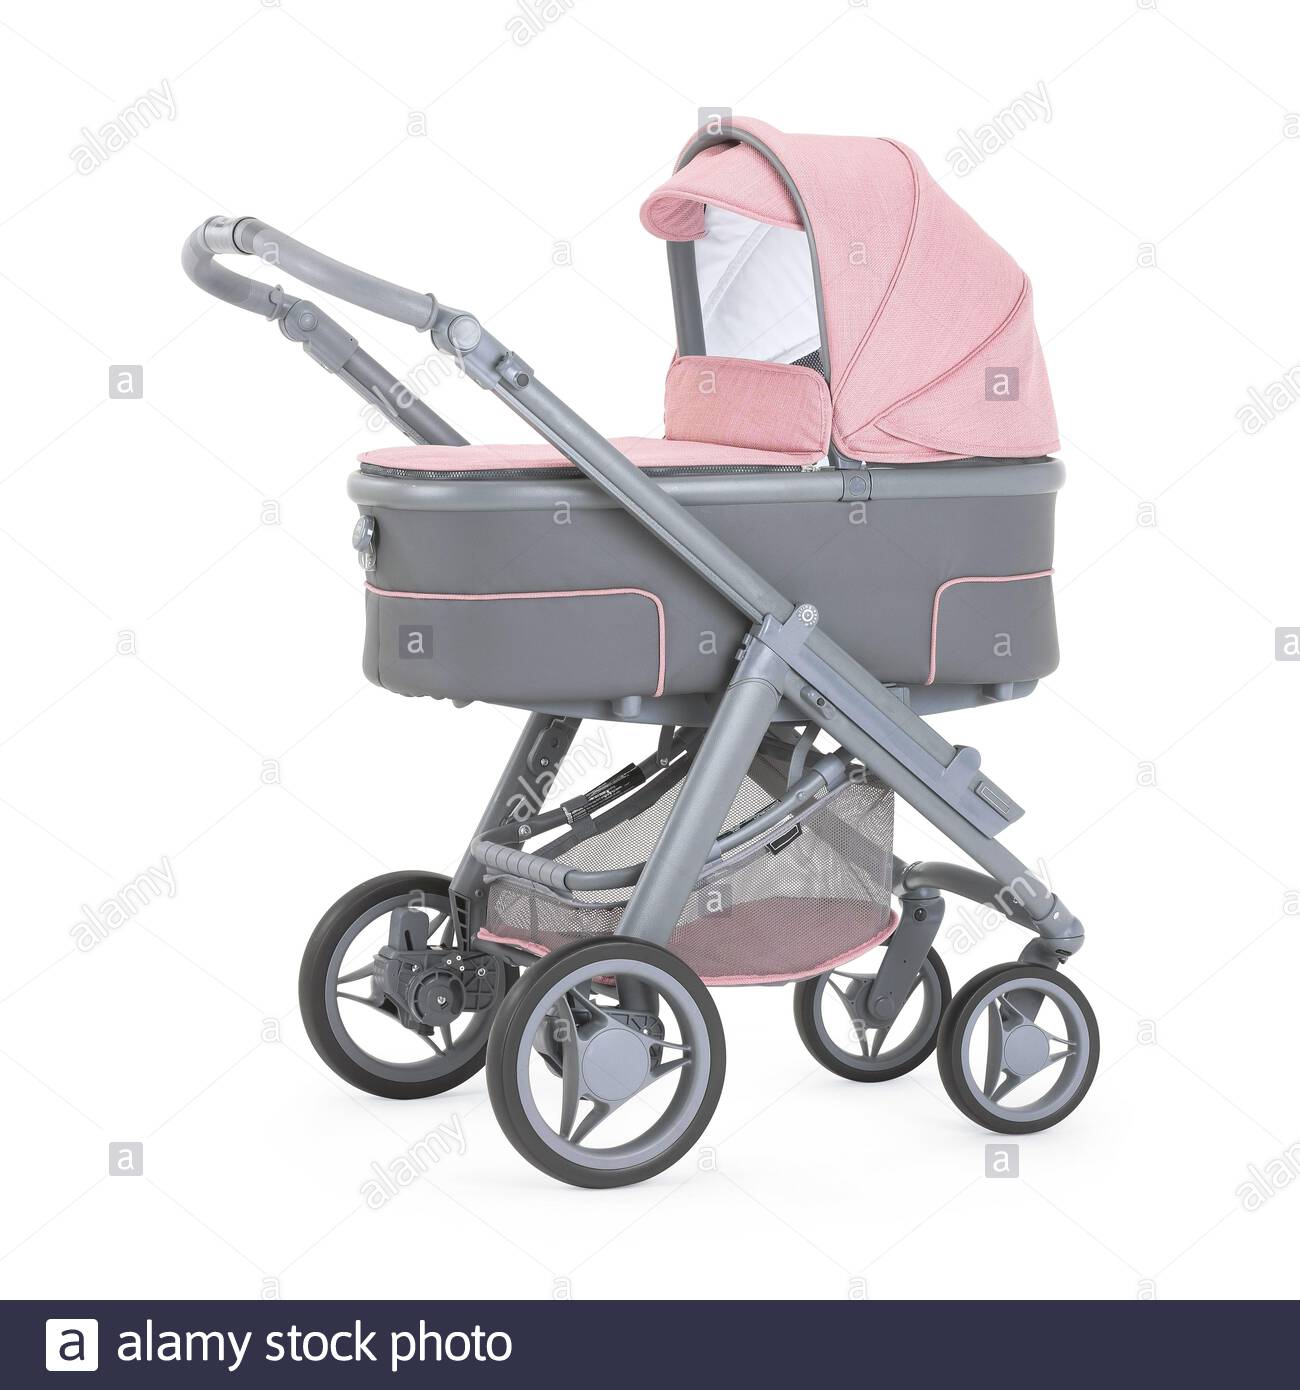 carrycot on wheels